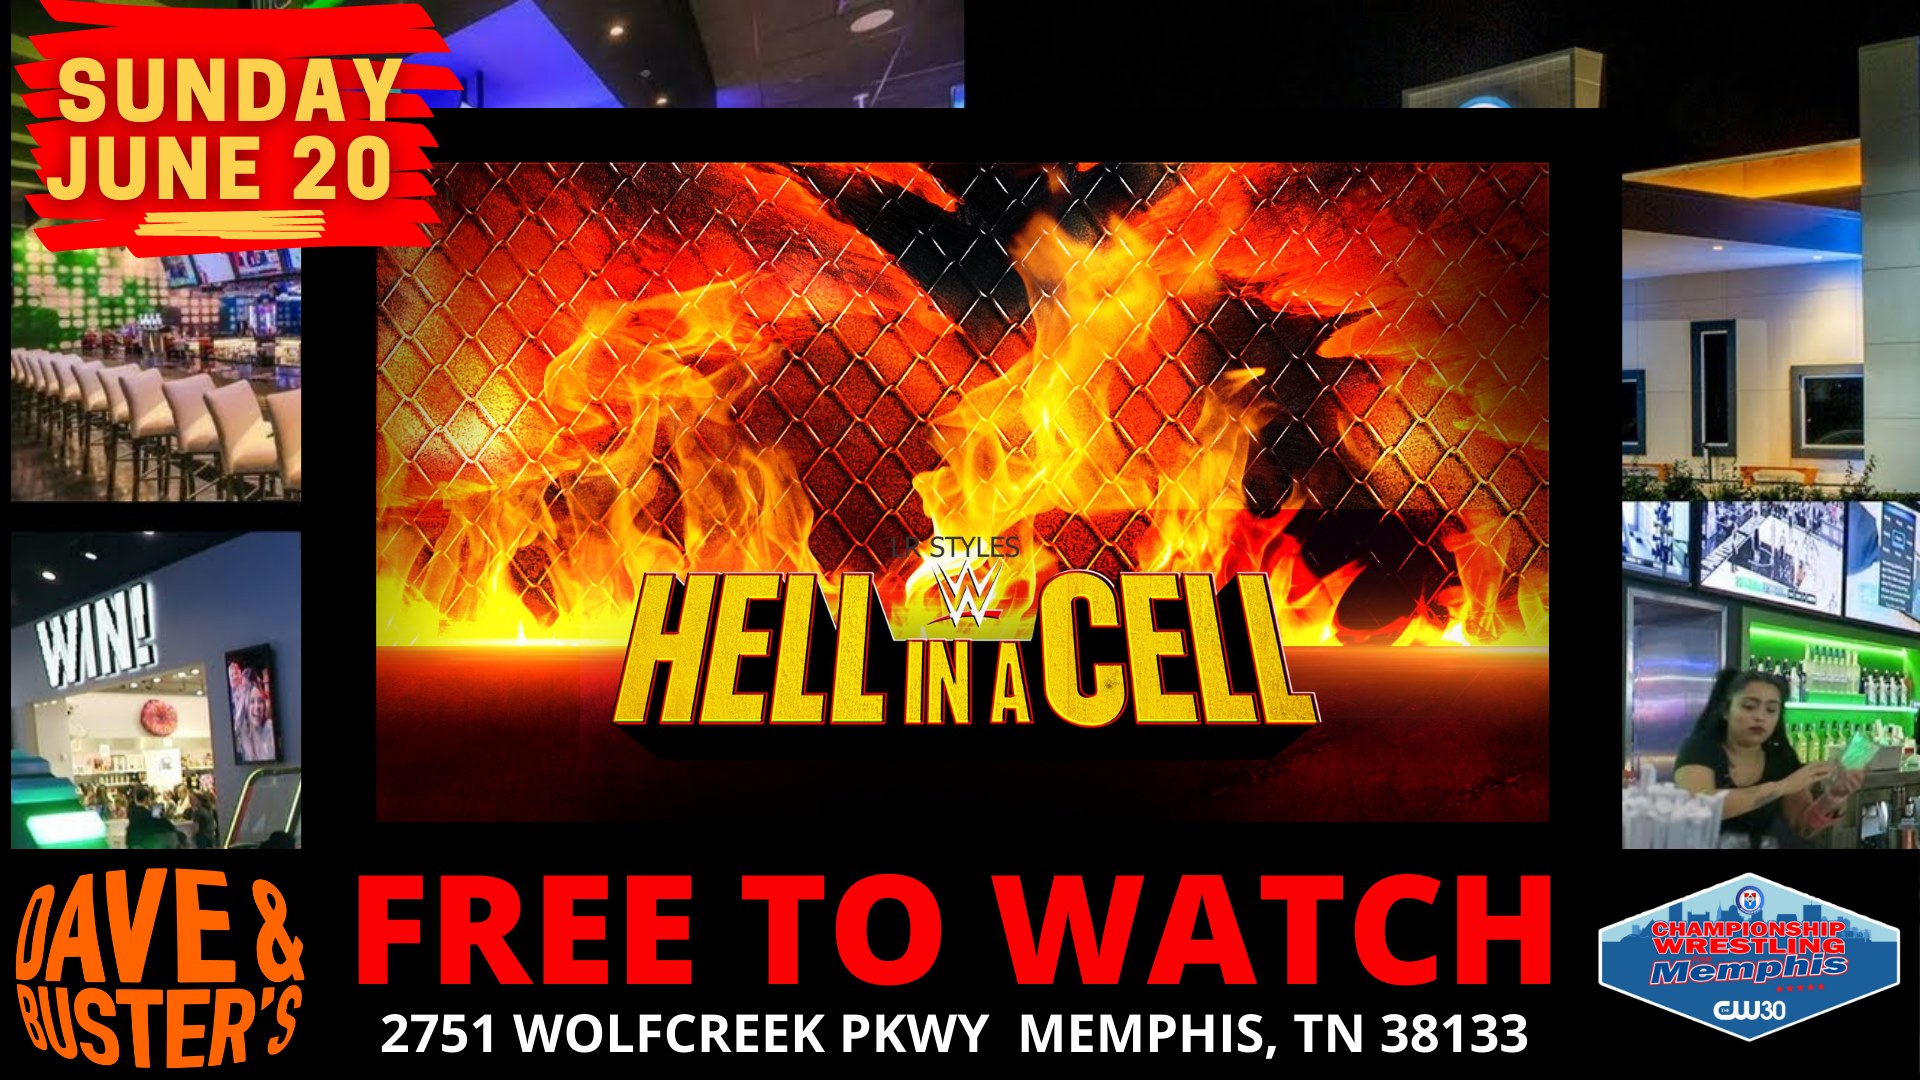 Wrestling News Center WWE Hell in a Cell Watch Party Sunday, June 20th at Dave and Busters Memphis, TN